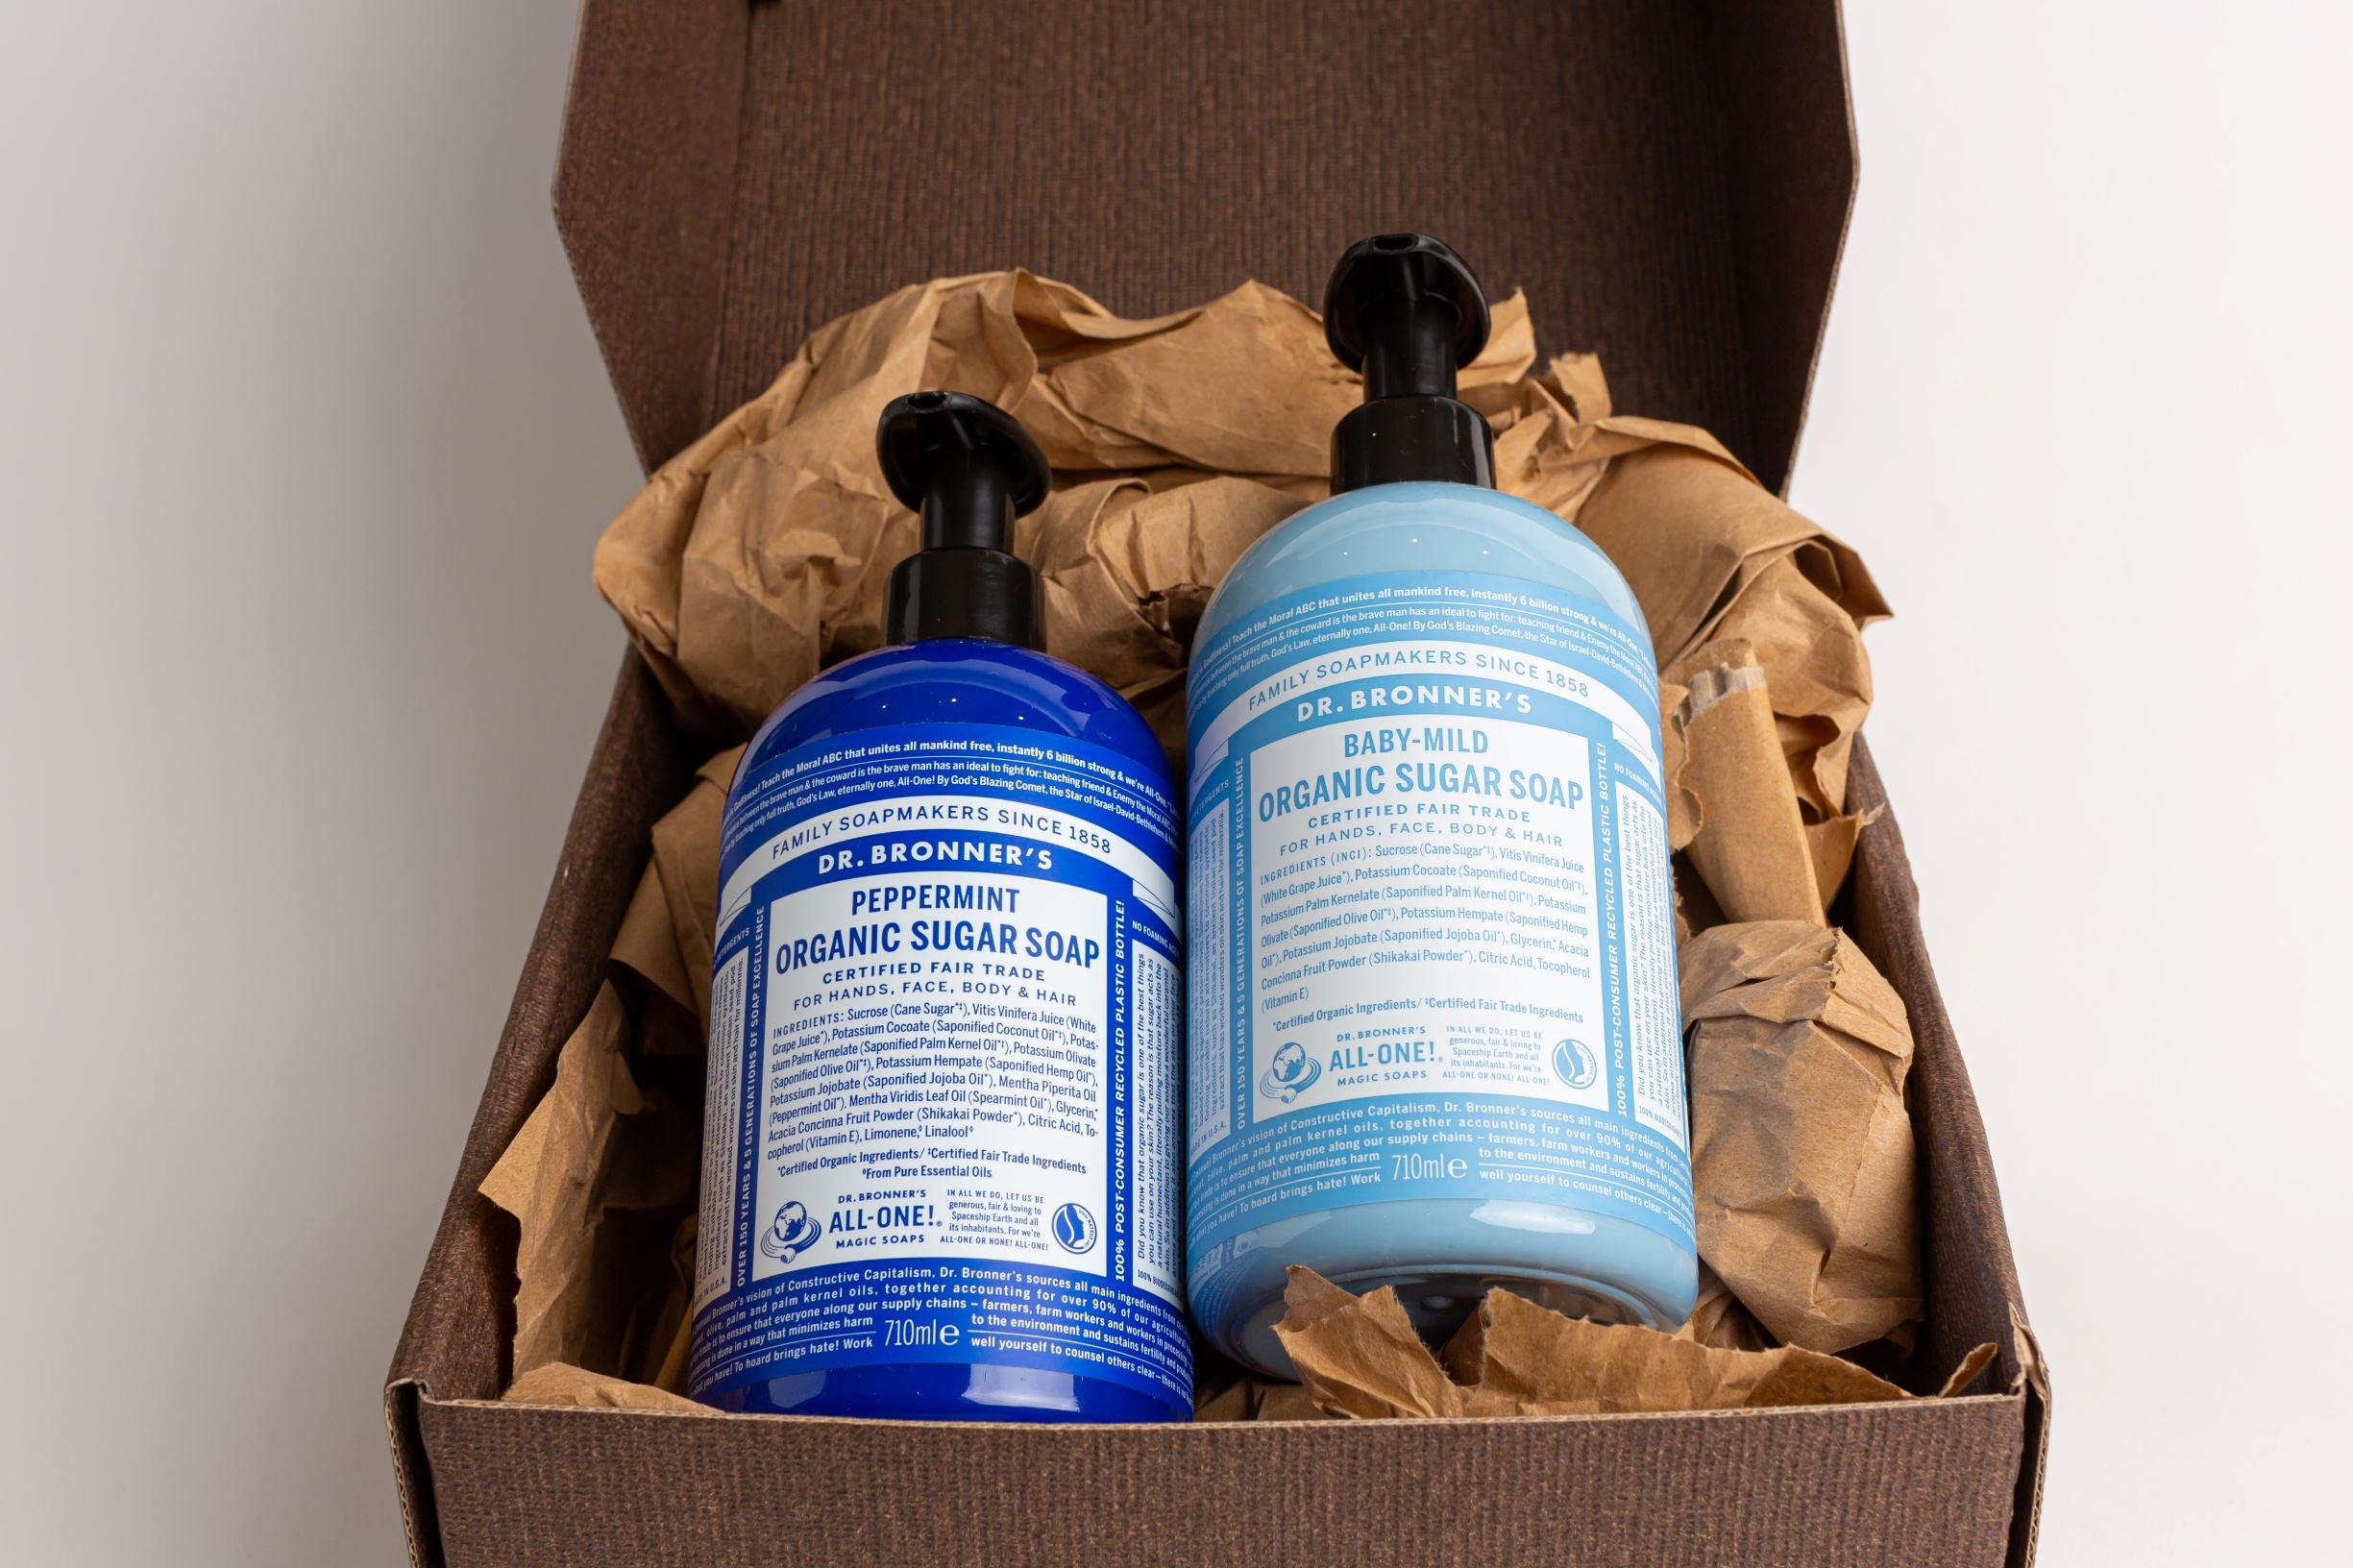 Dr Bronner's Organic Sugar Soap Gift Set 710ml (Baby-Mild & Peppermint) + Free 60ml Soap and Gift Bag